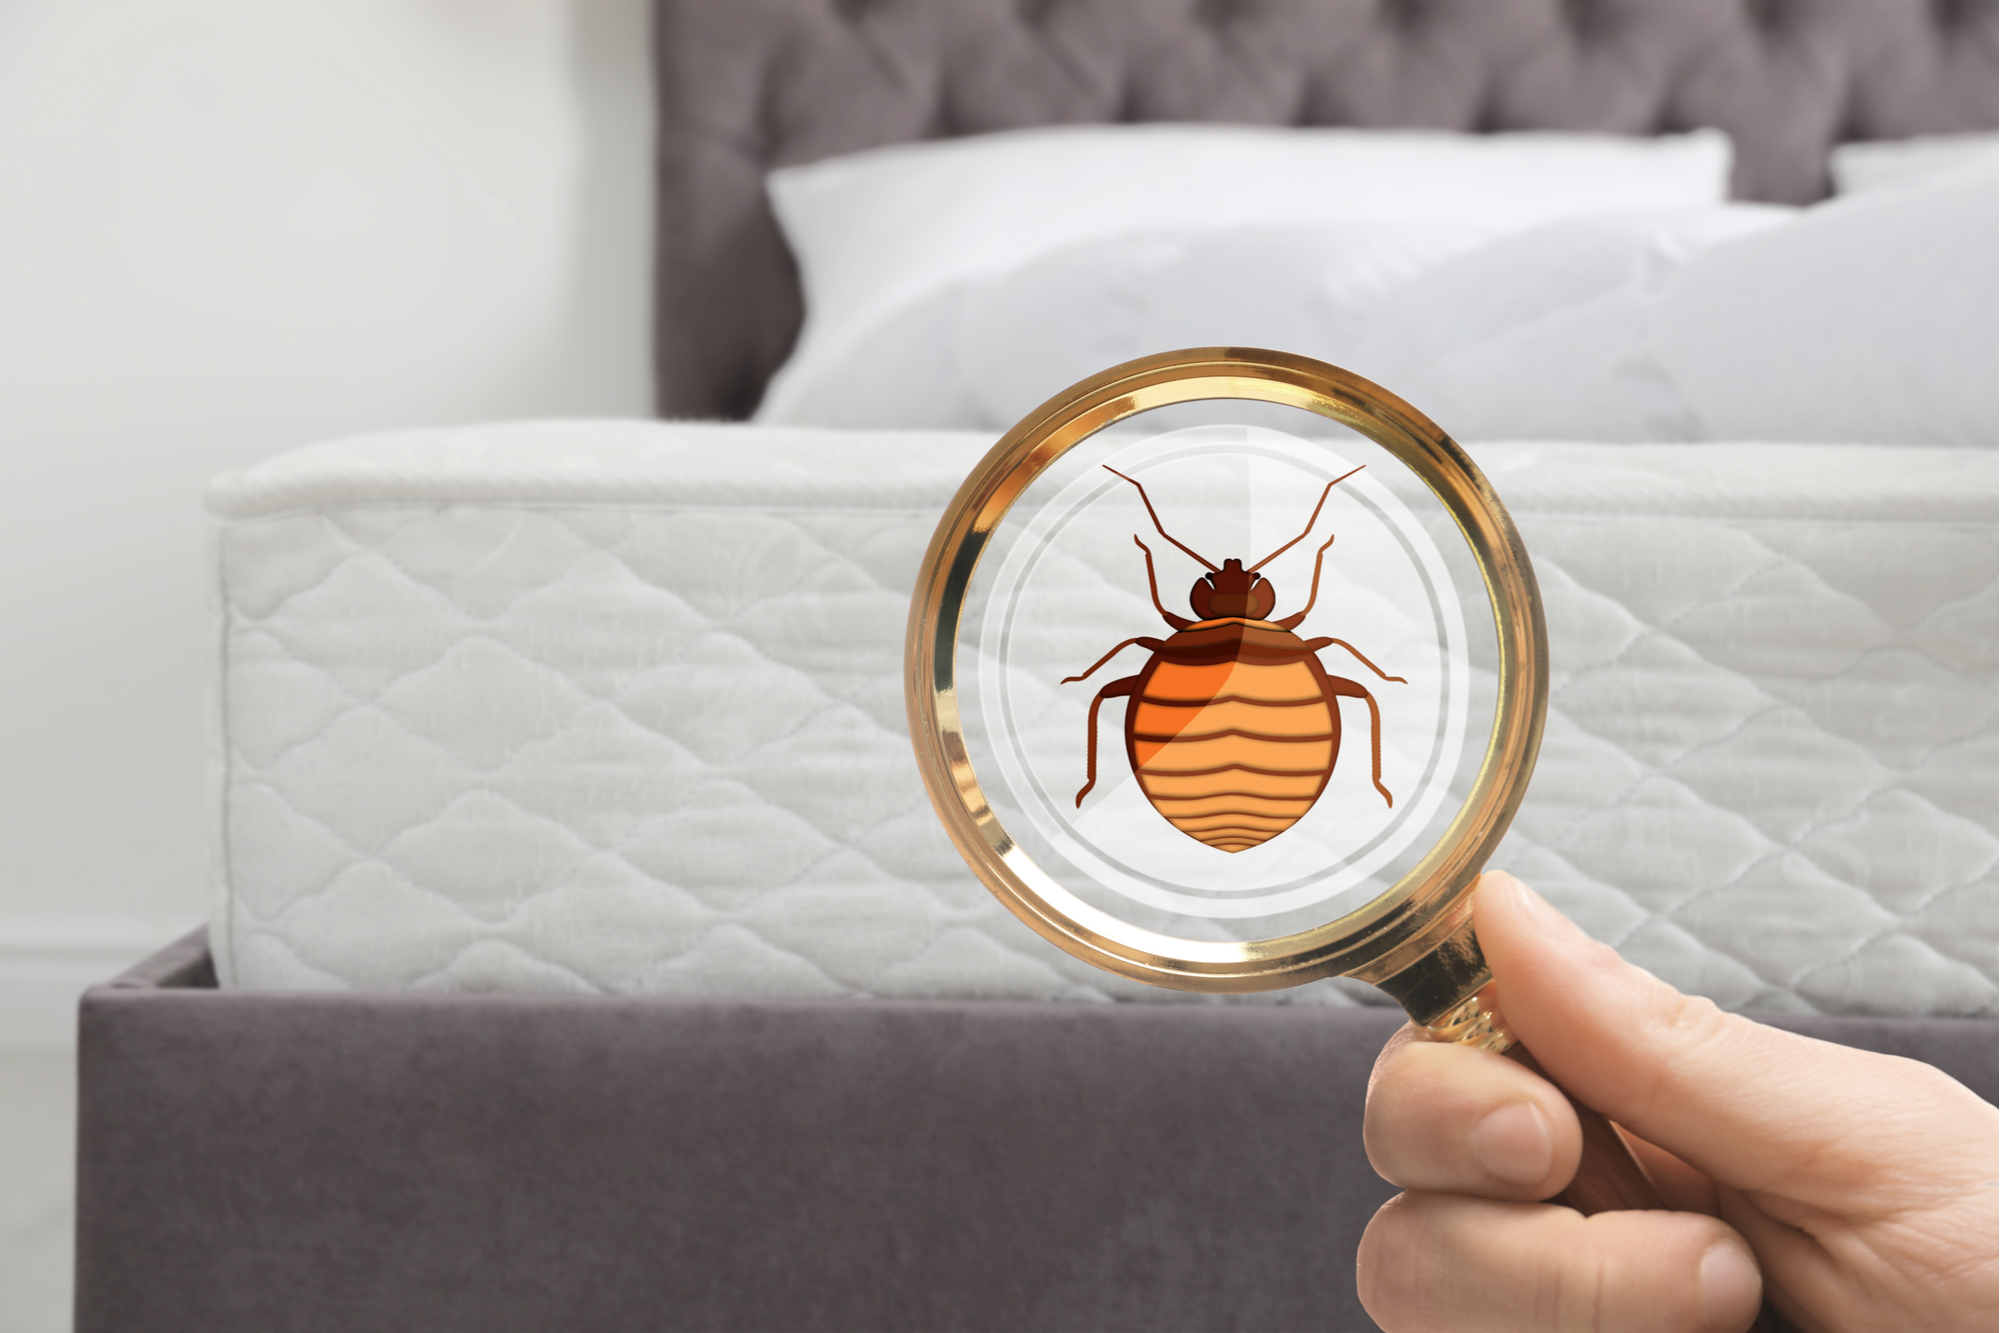 Magnifying glass detecting bed bugs on mattress